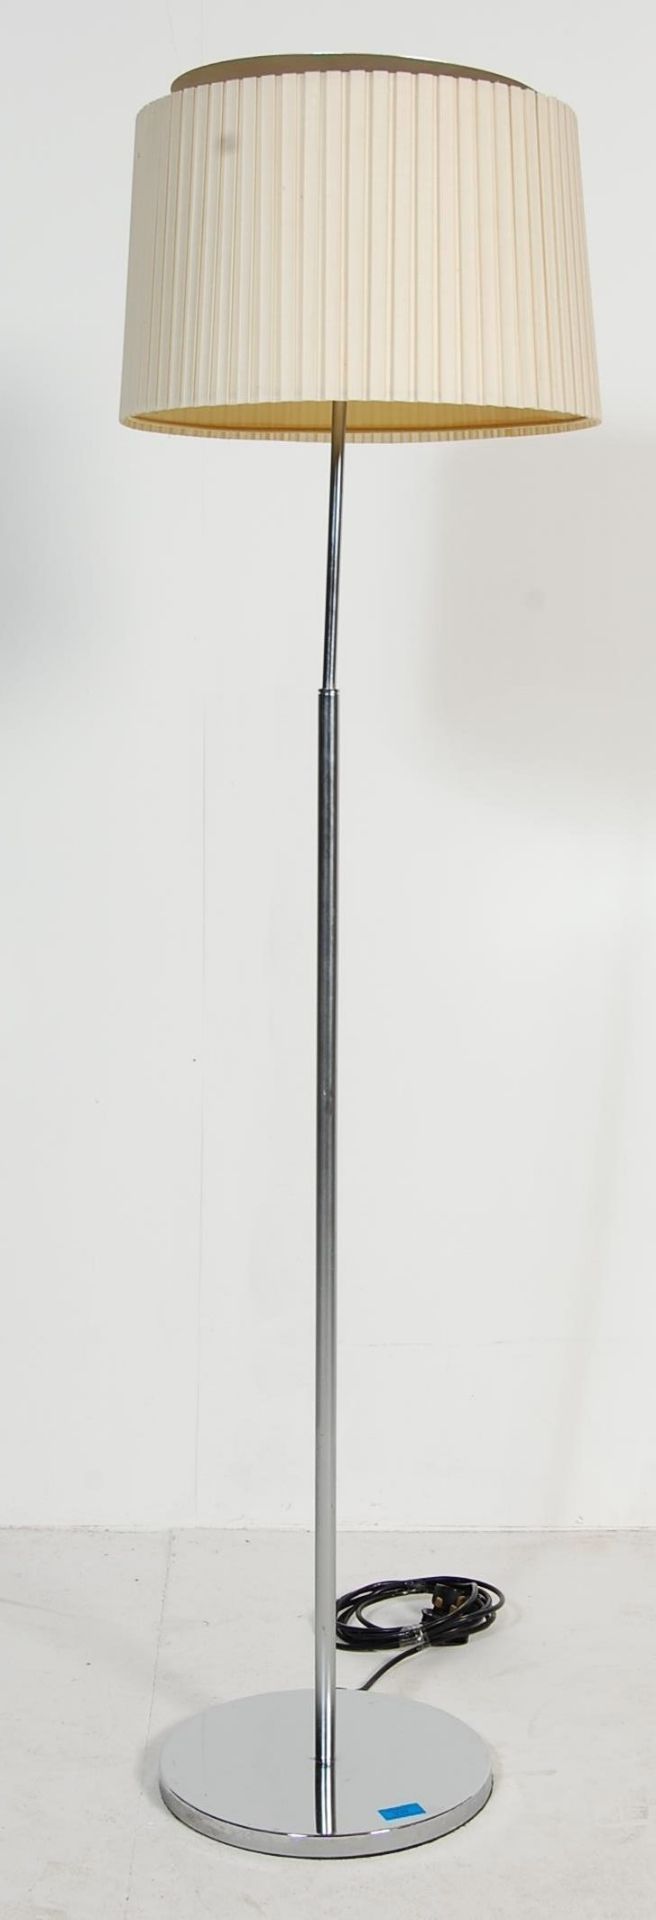 CONTEMPORARY VINTAGE STYLE CHROME METAL FLOOR STANDING LAMP